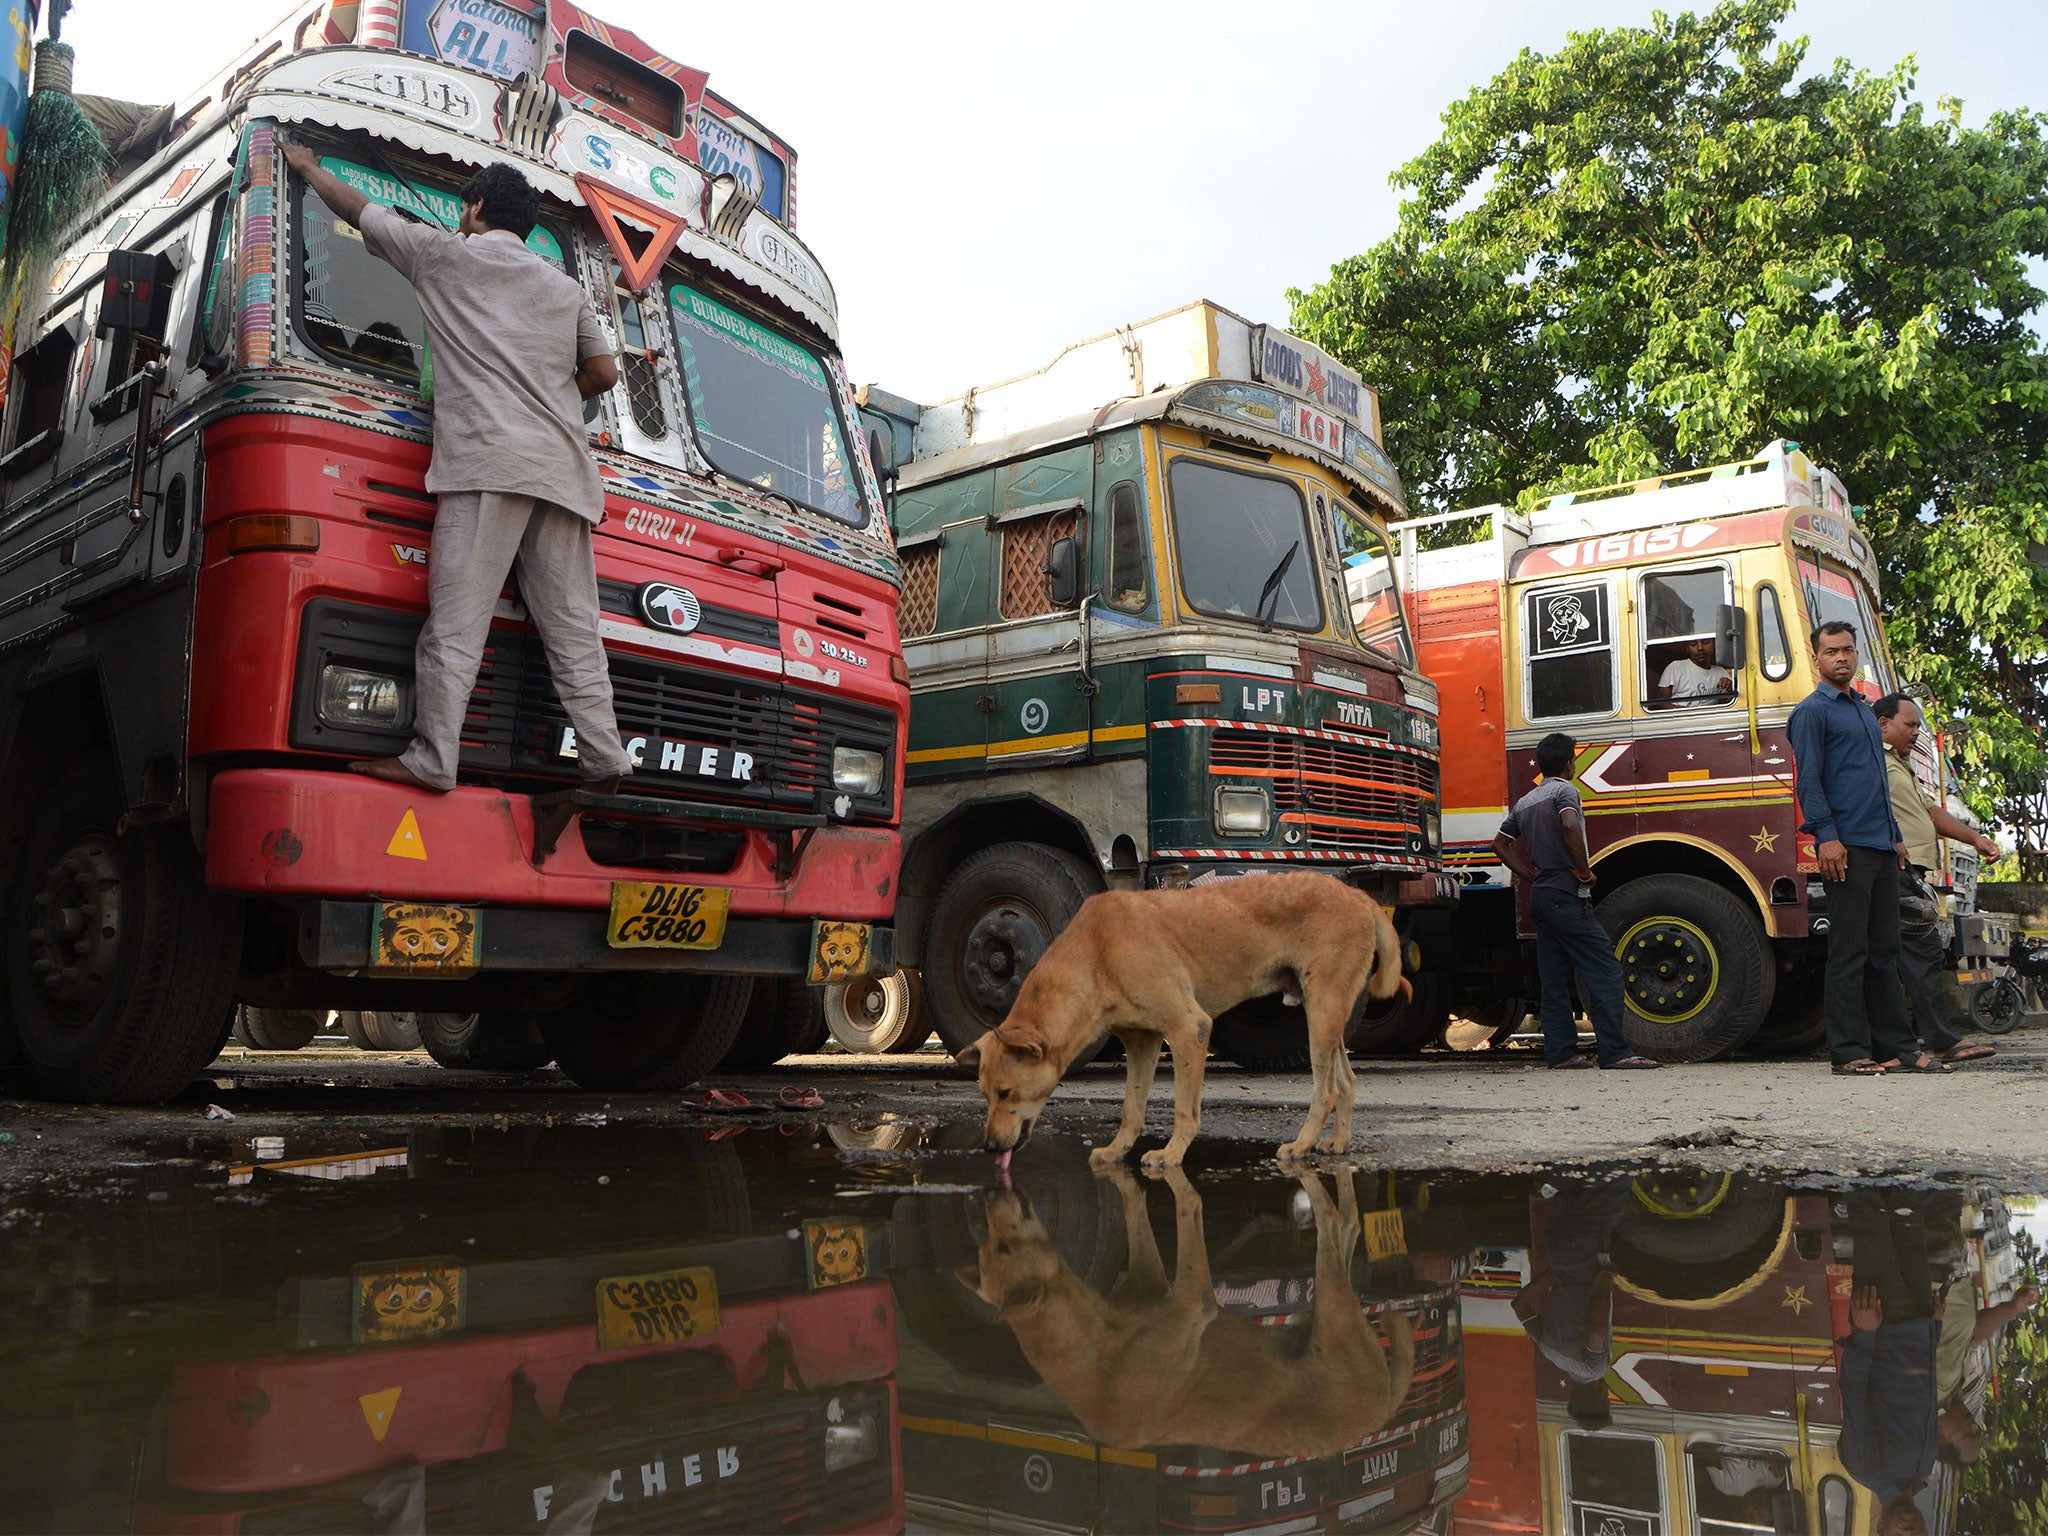 Khamra is thought to have targeted truck drivers across central regions of India